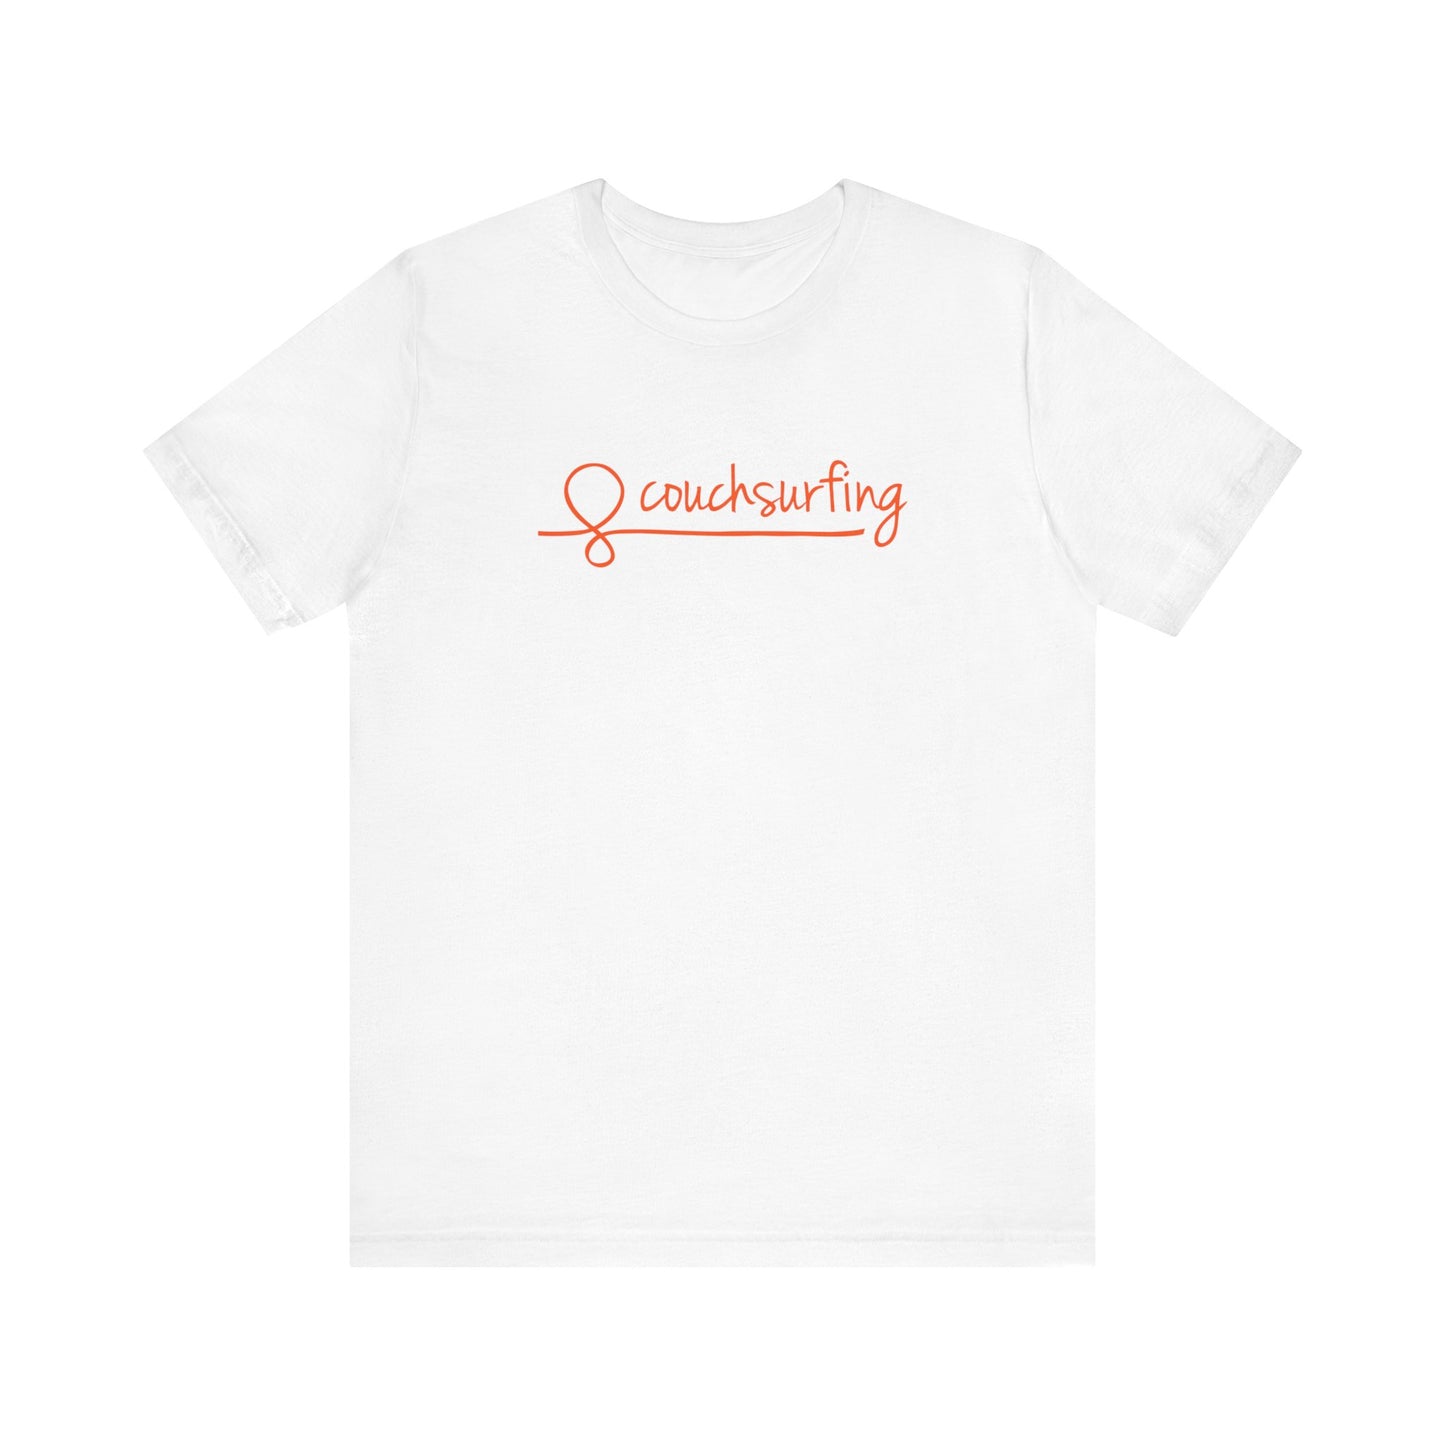 The Couchsurfing Unisex Tee